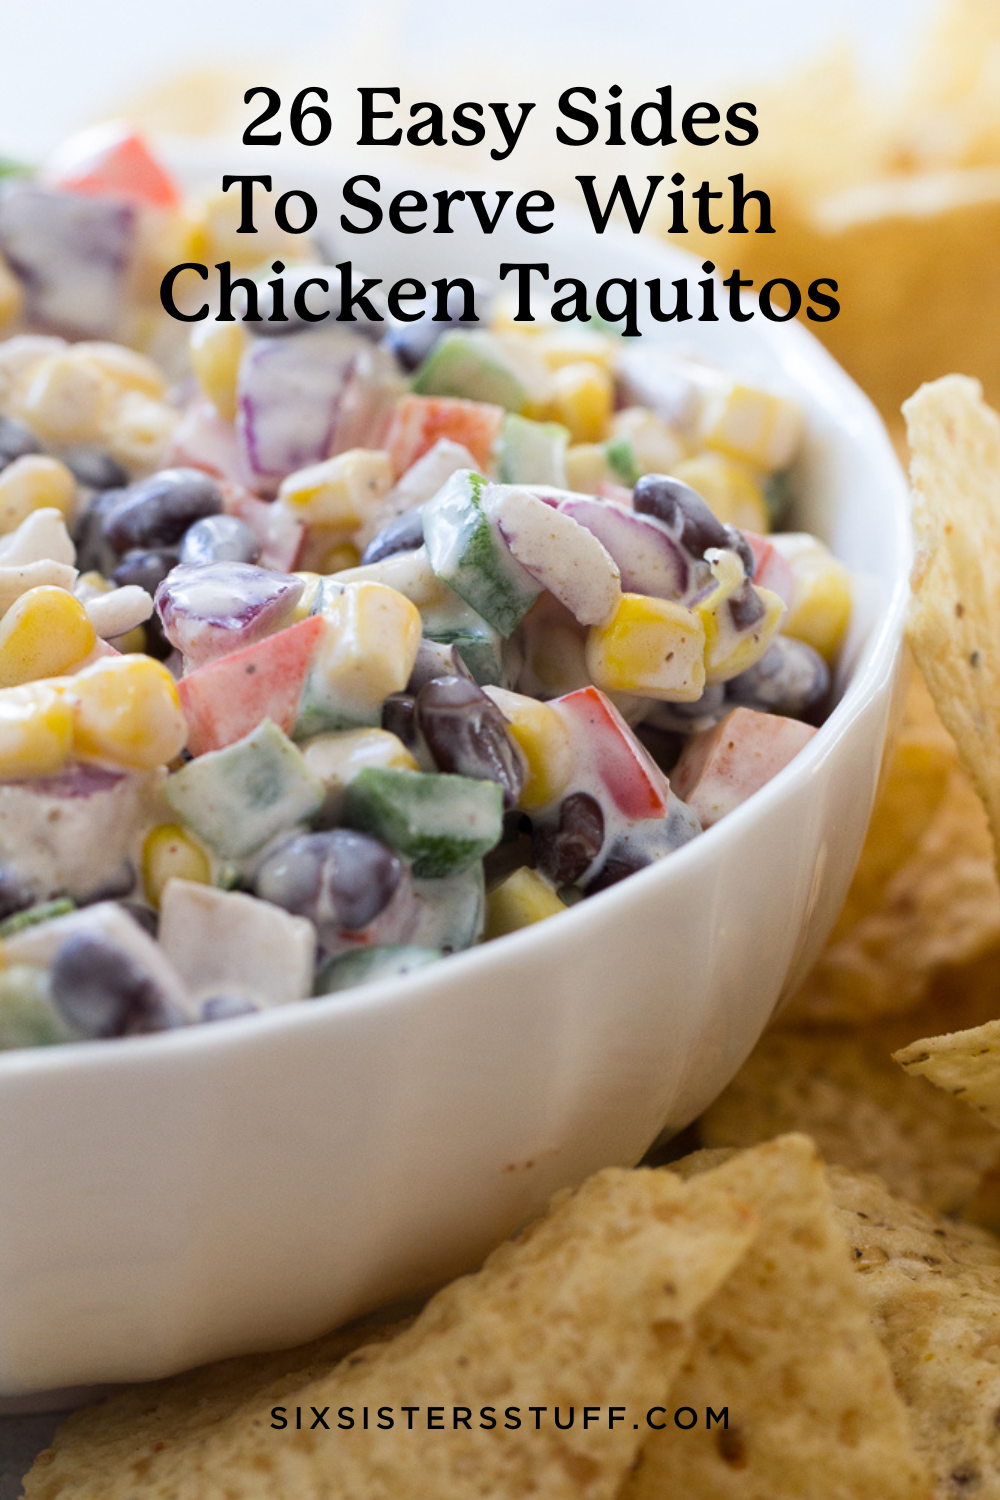 26 Easy Sides To Serve With Chicken Taquitos